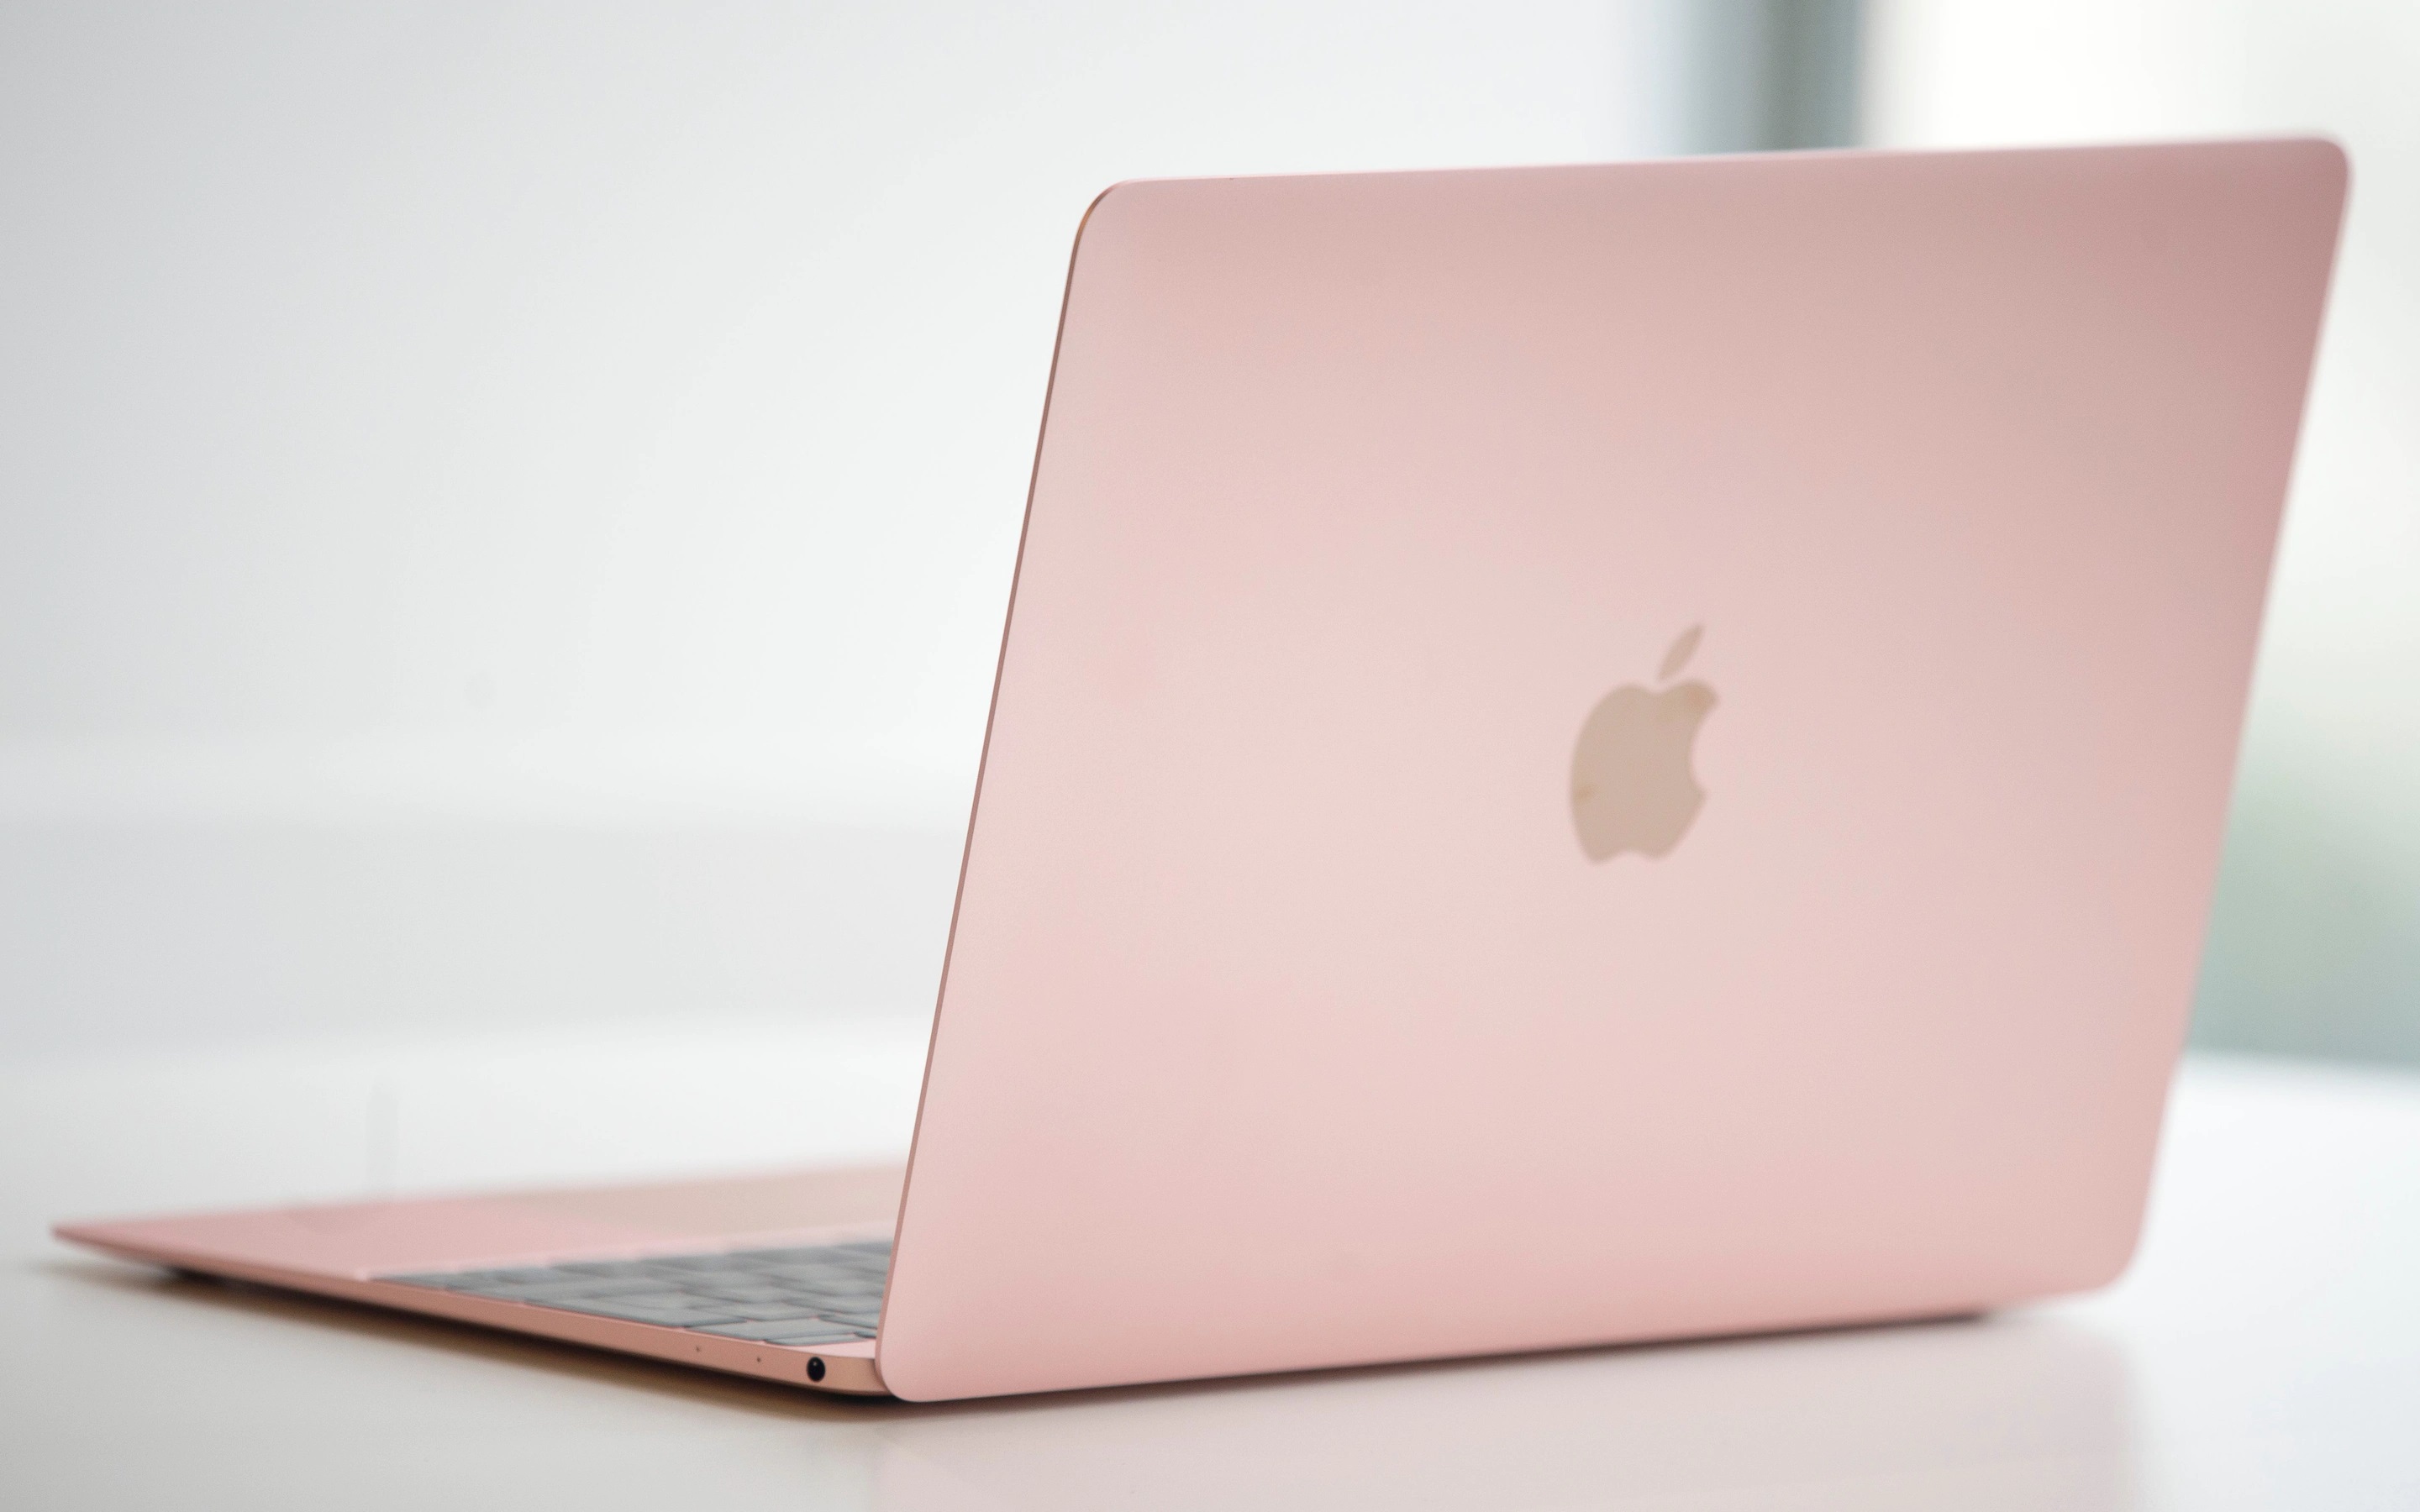 Ming-Chi Kuo: Apple is considering releasing the cheapest MacBook in the lineup next year